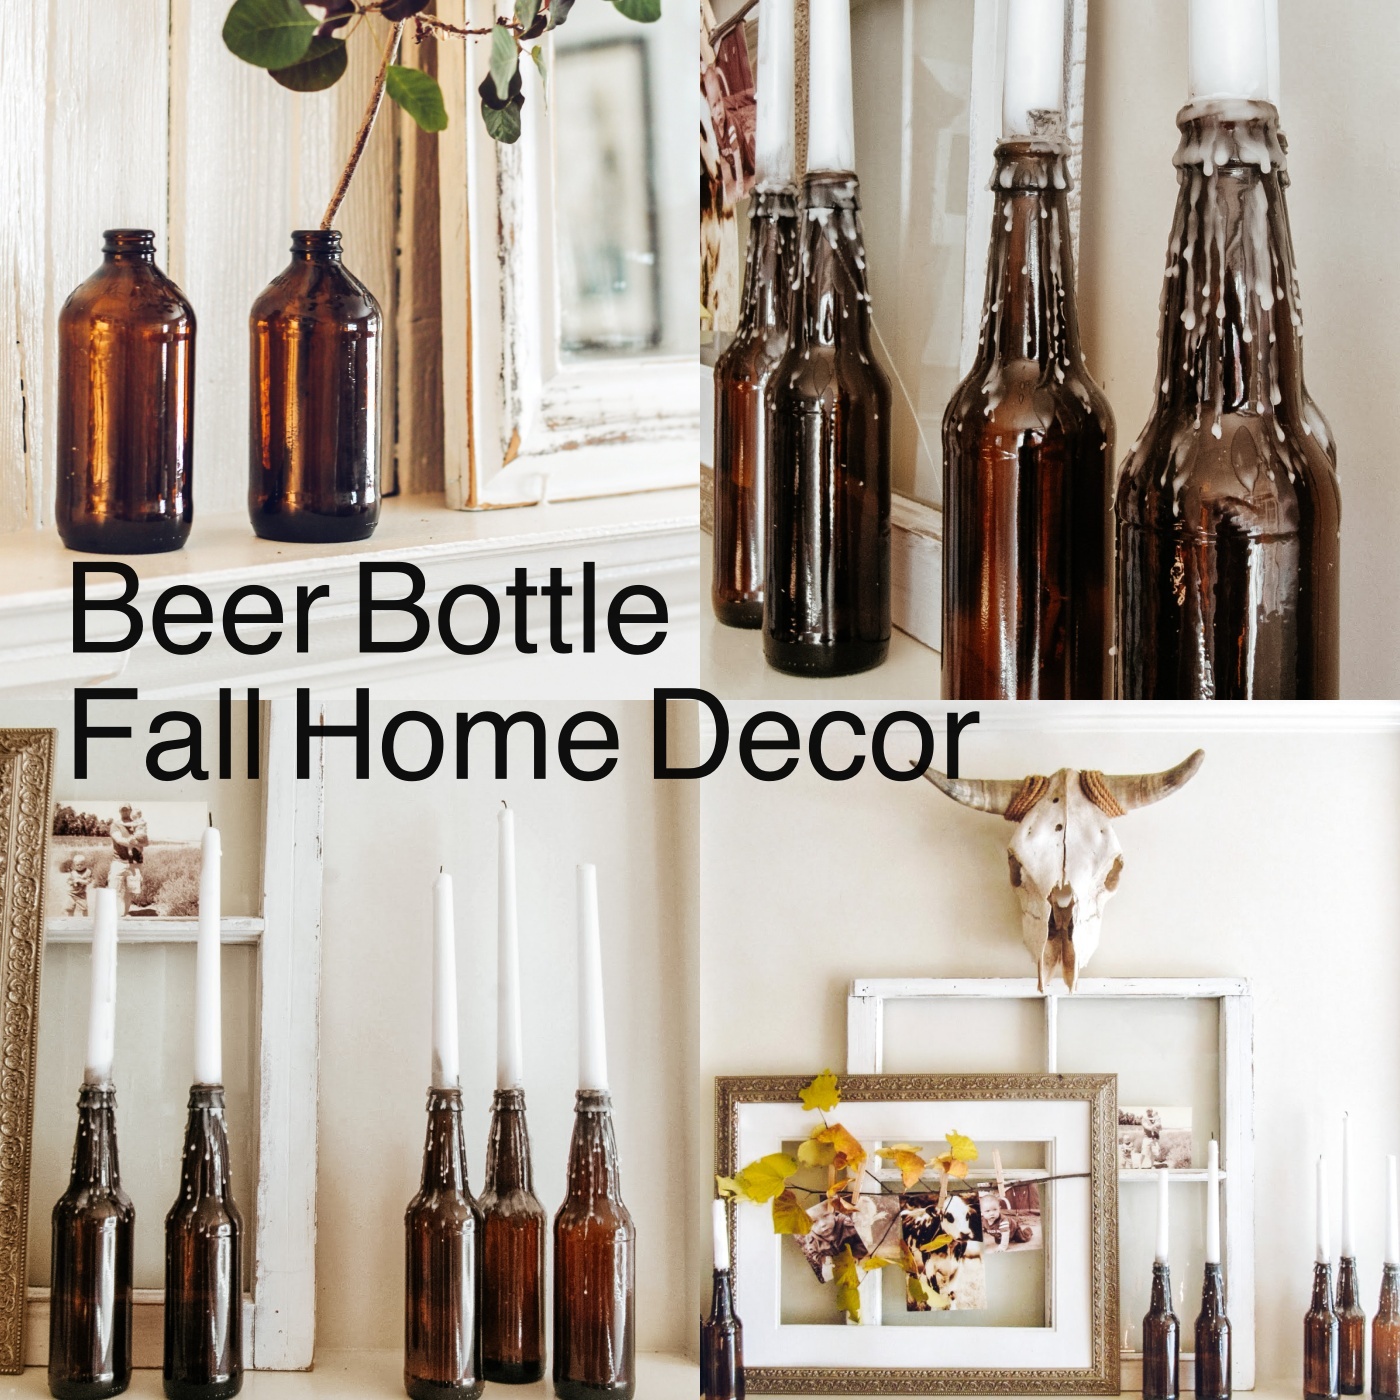 DIY Beer Bottle Fall Home Decor - The Wicker House